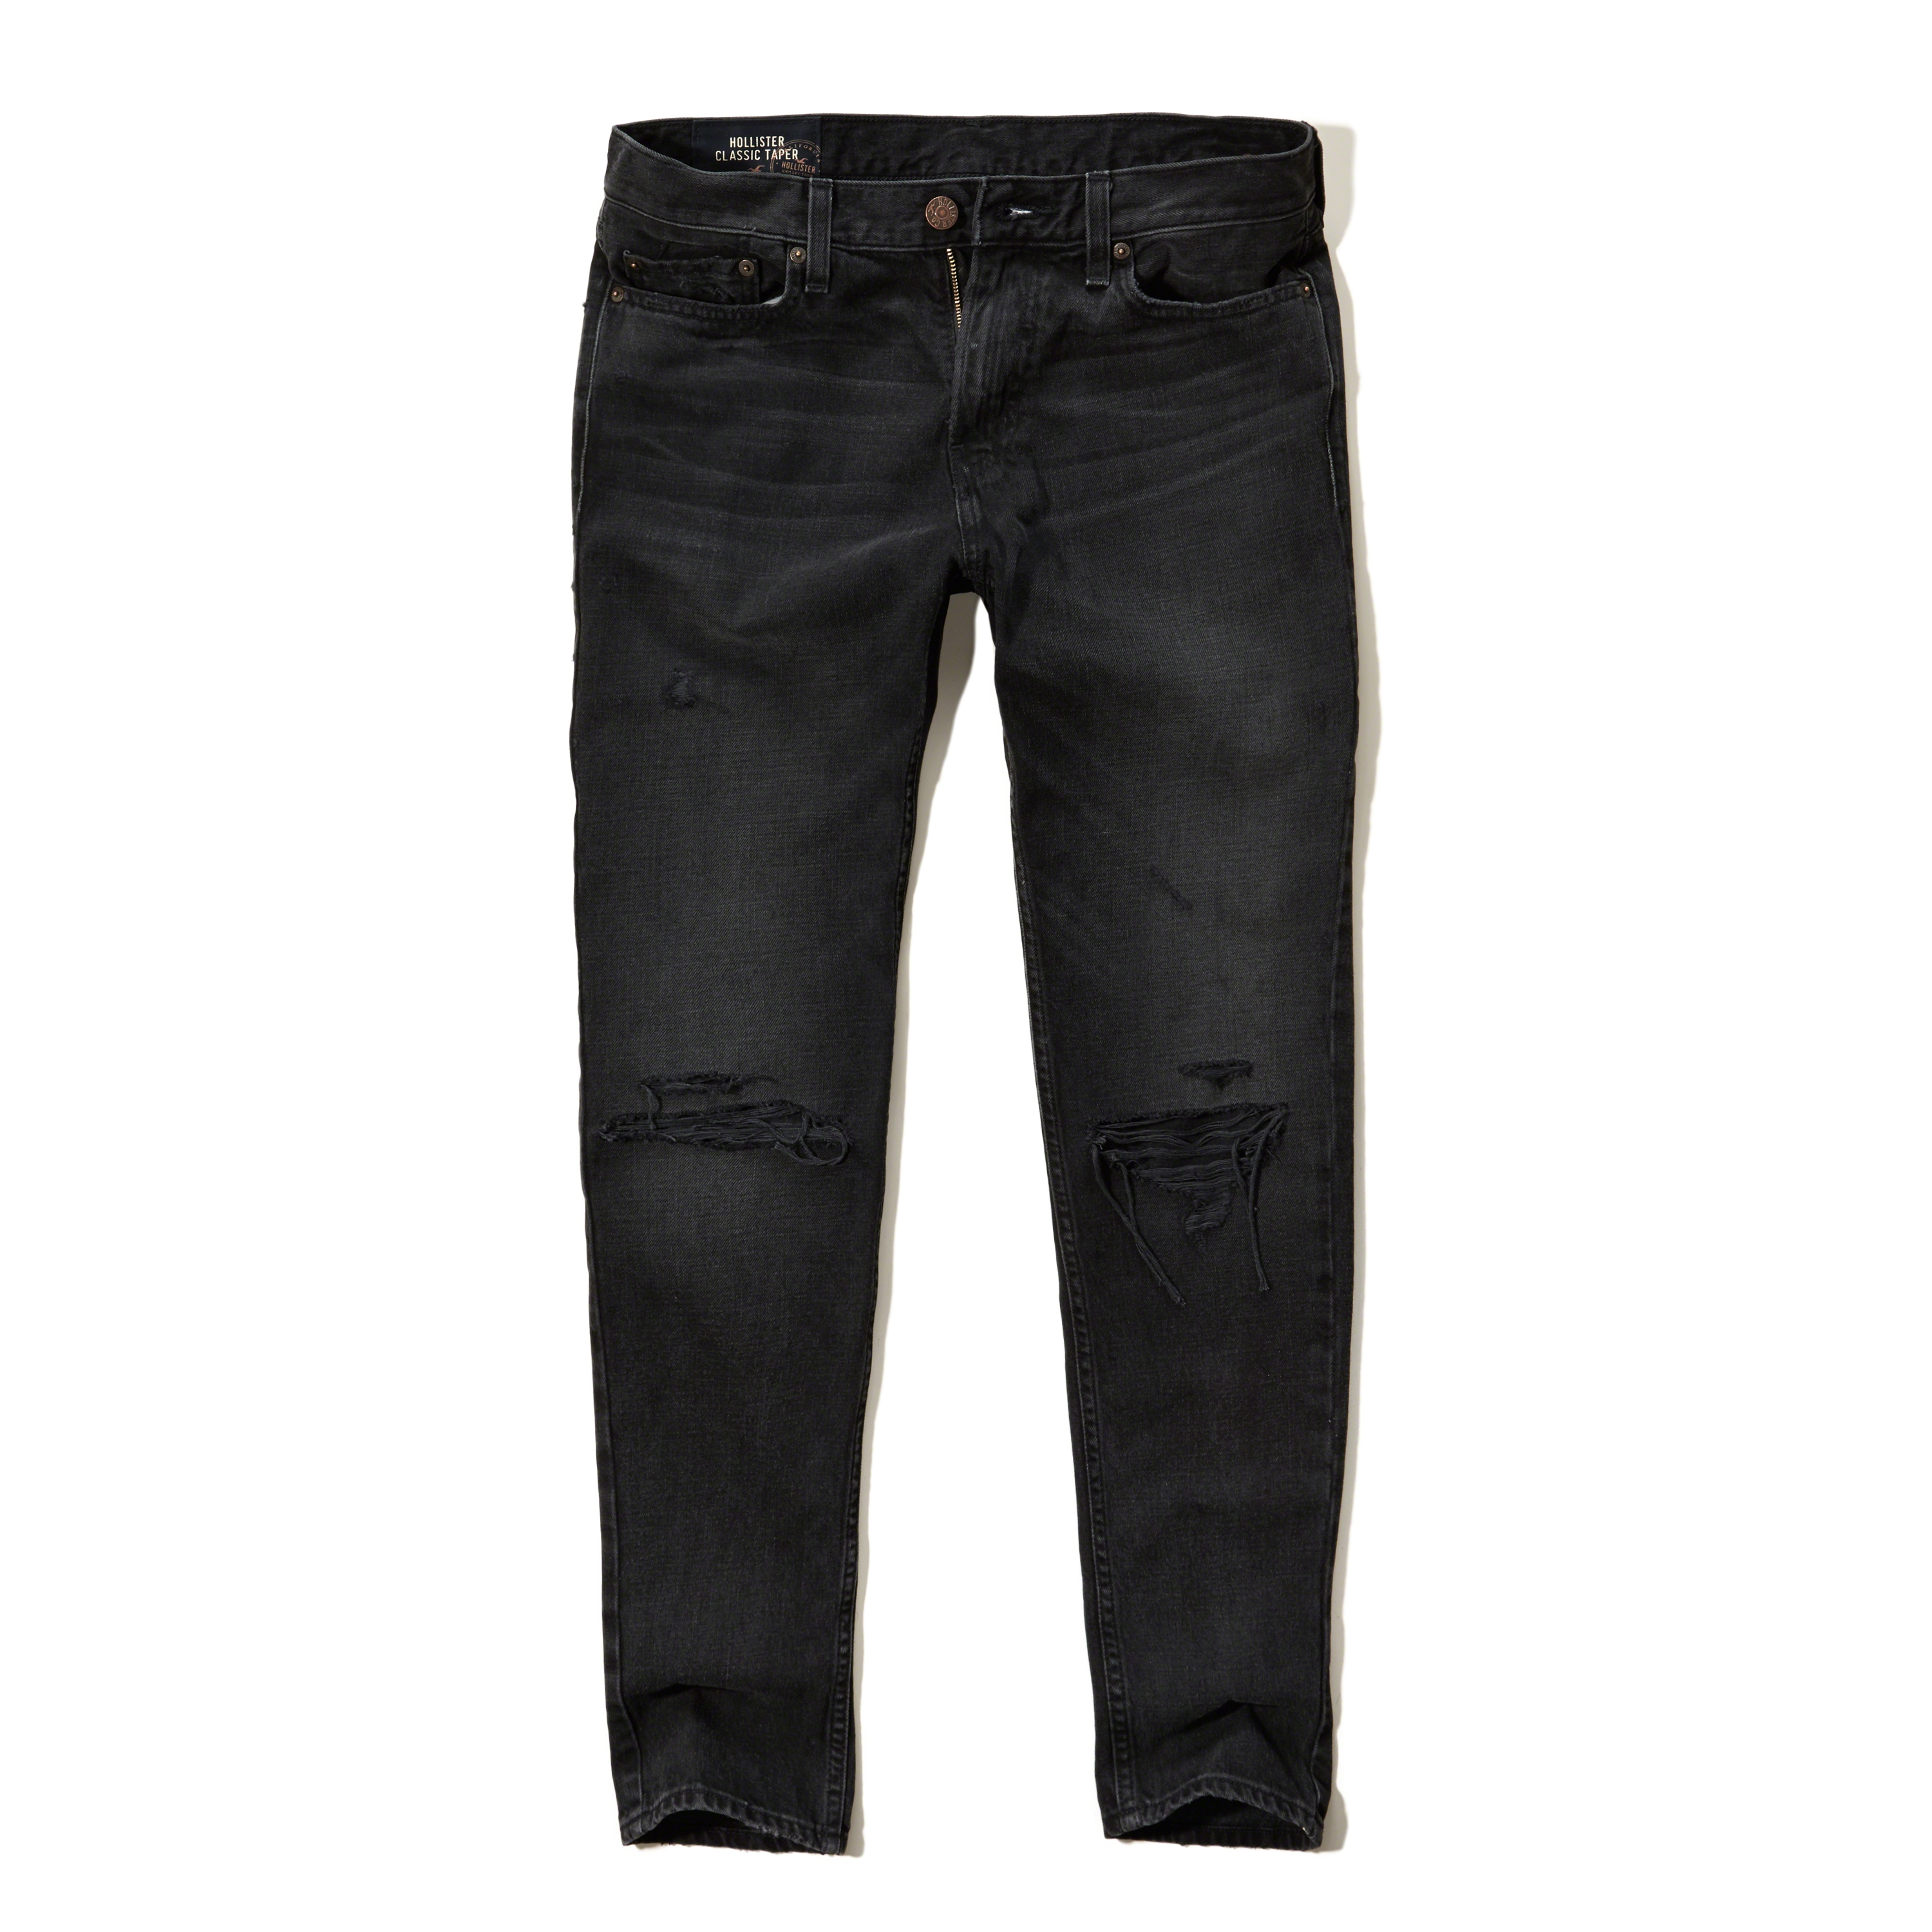 Lyst - Hollister Classic Taper Jeans in Black for Men